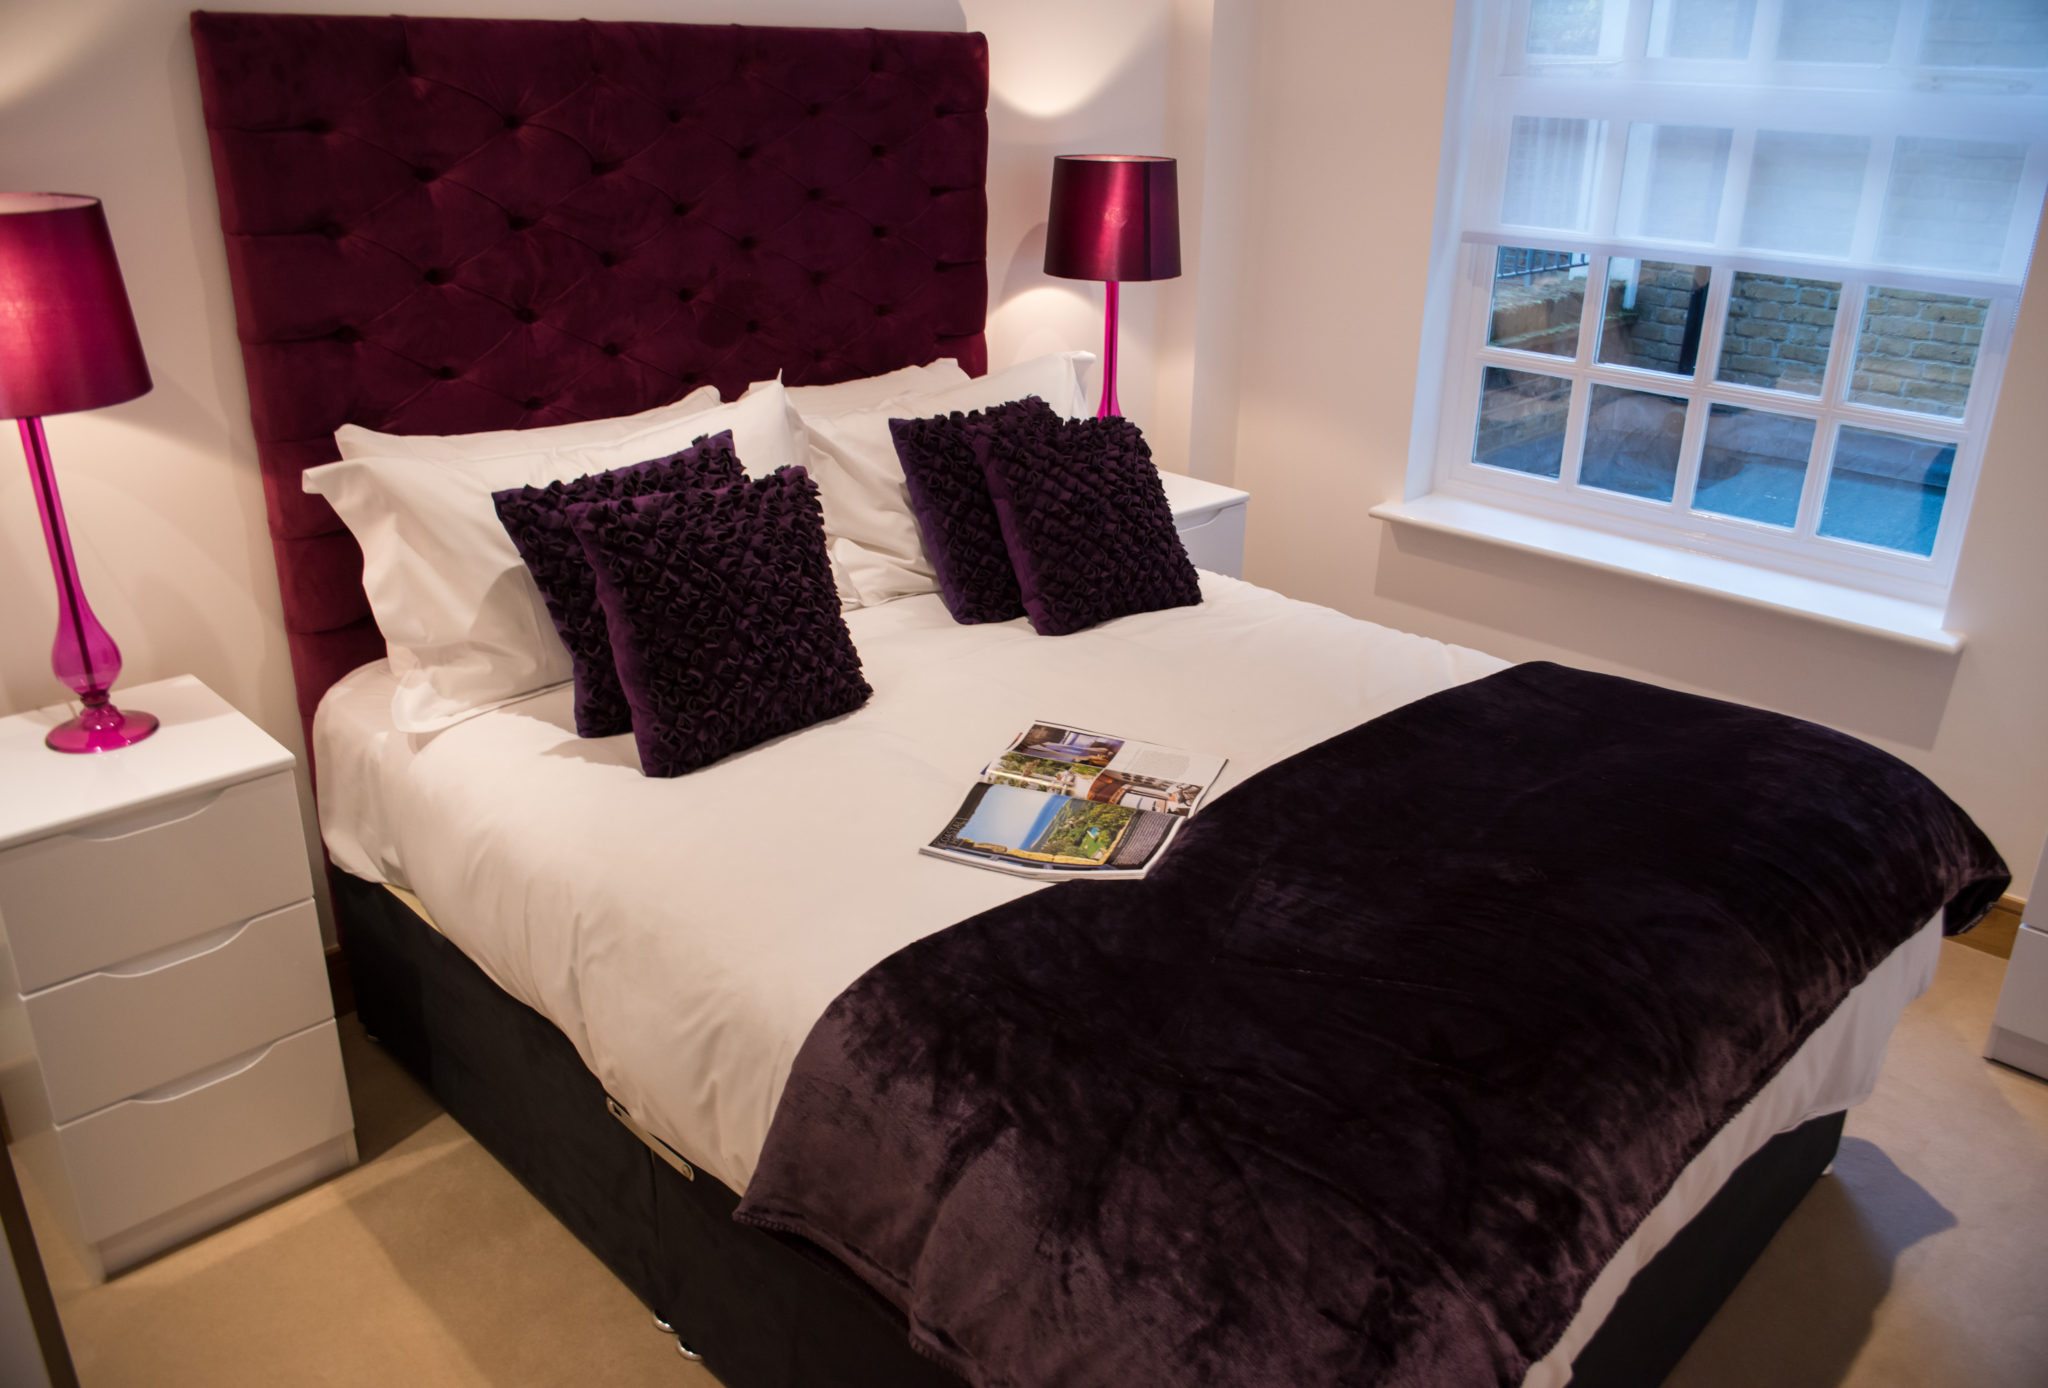 Central London Corporate Accommodation - Marylebone Apartments Available Now! Book Corporate Serviced Apartments in London! Free Wifi! I Urban Stay